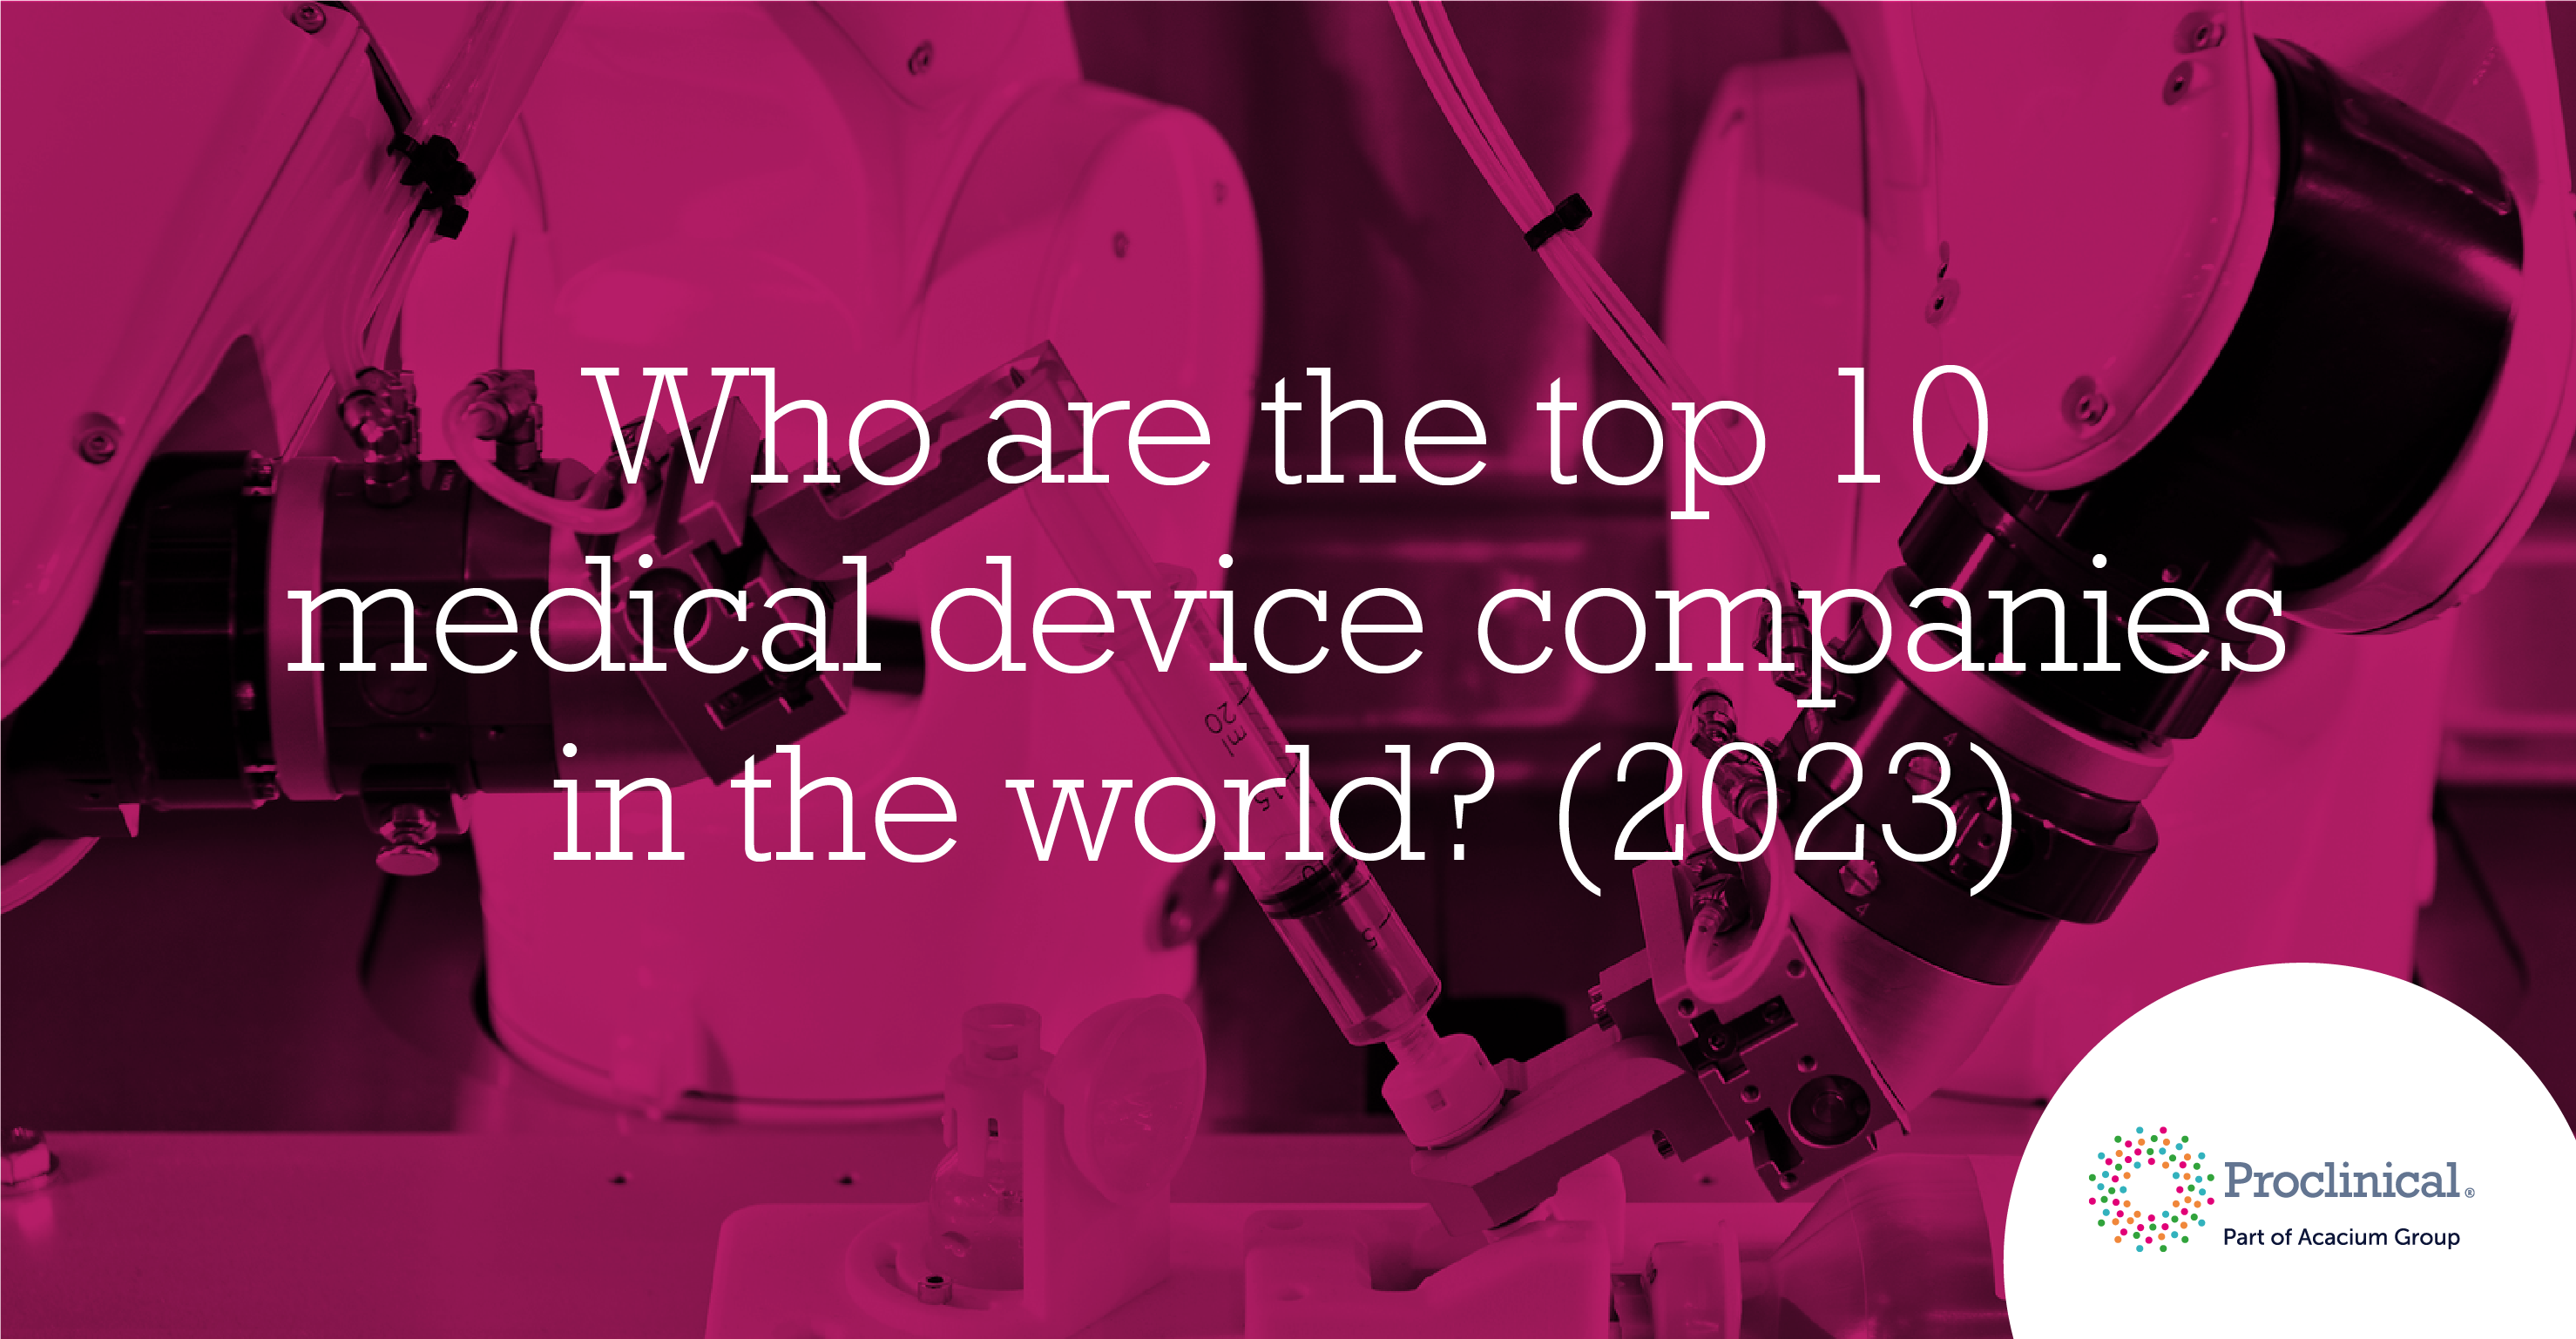 Who are the top 10 medical device companies in the world in 2023?